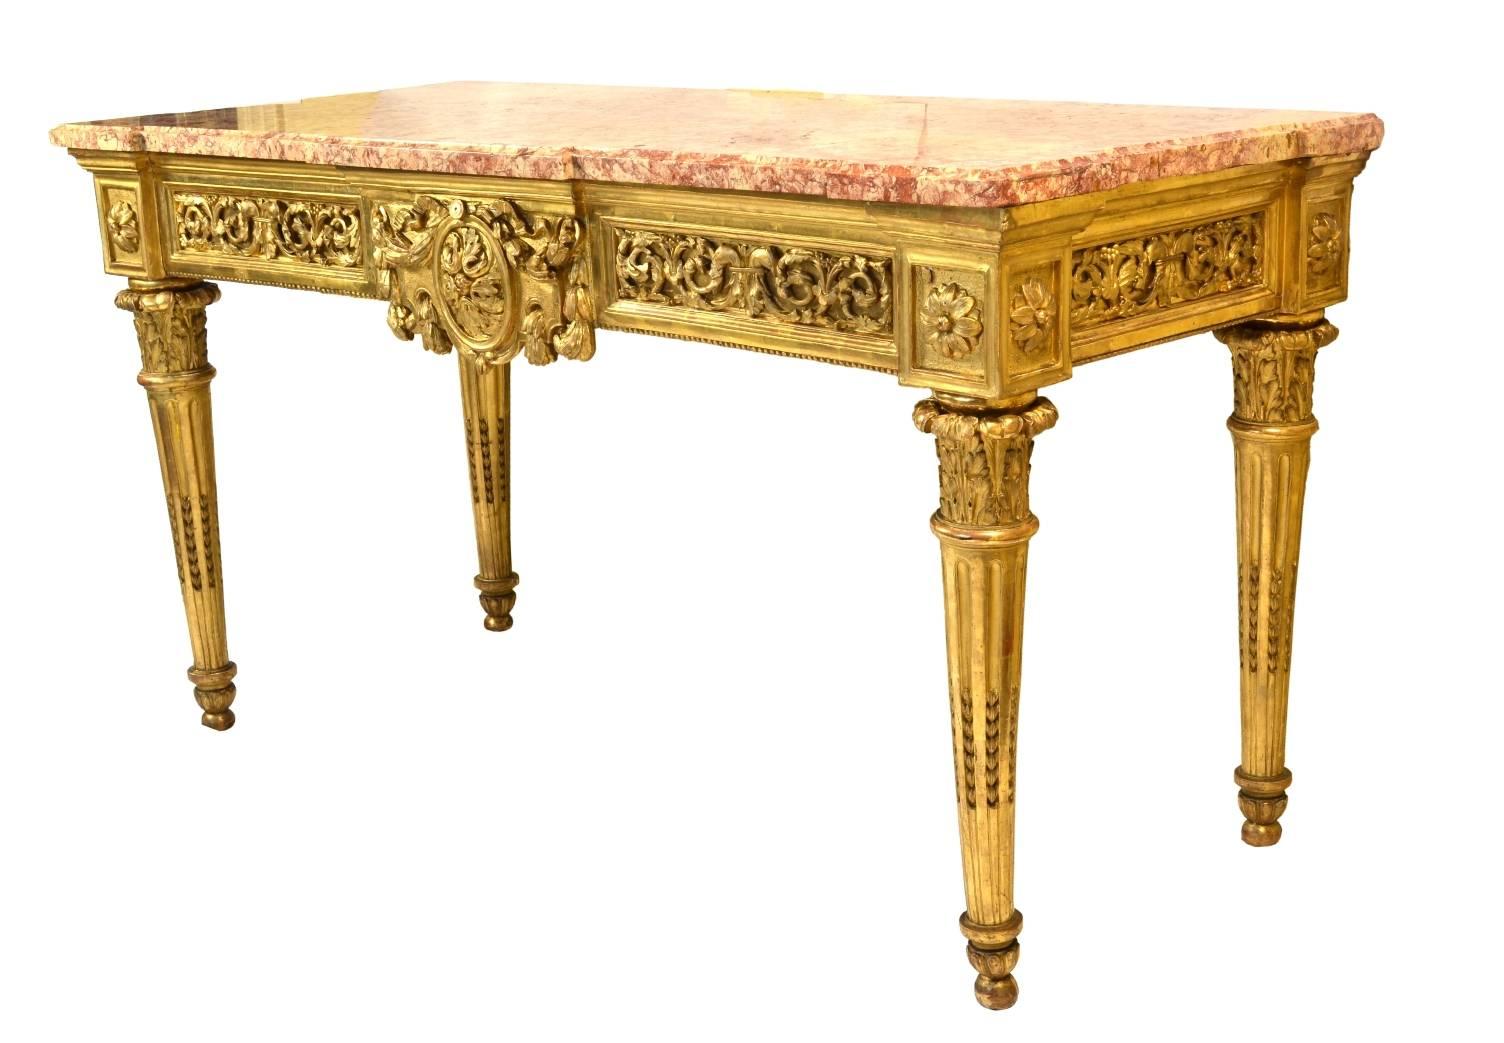 19th Century Italian Carved and Giltwood Neoclassical Console Table, circa 1790-1800 For Sale